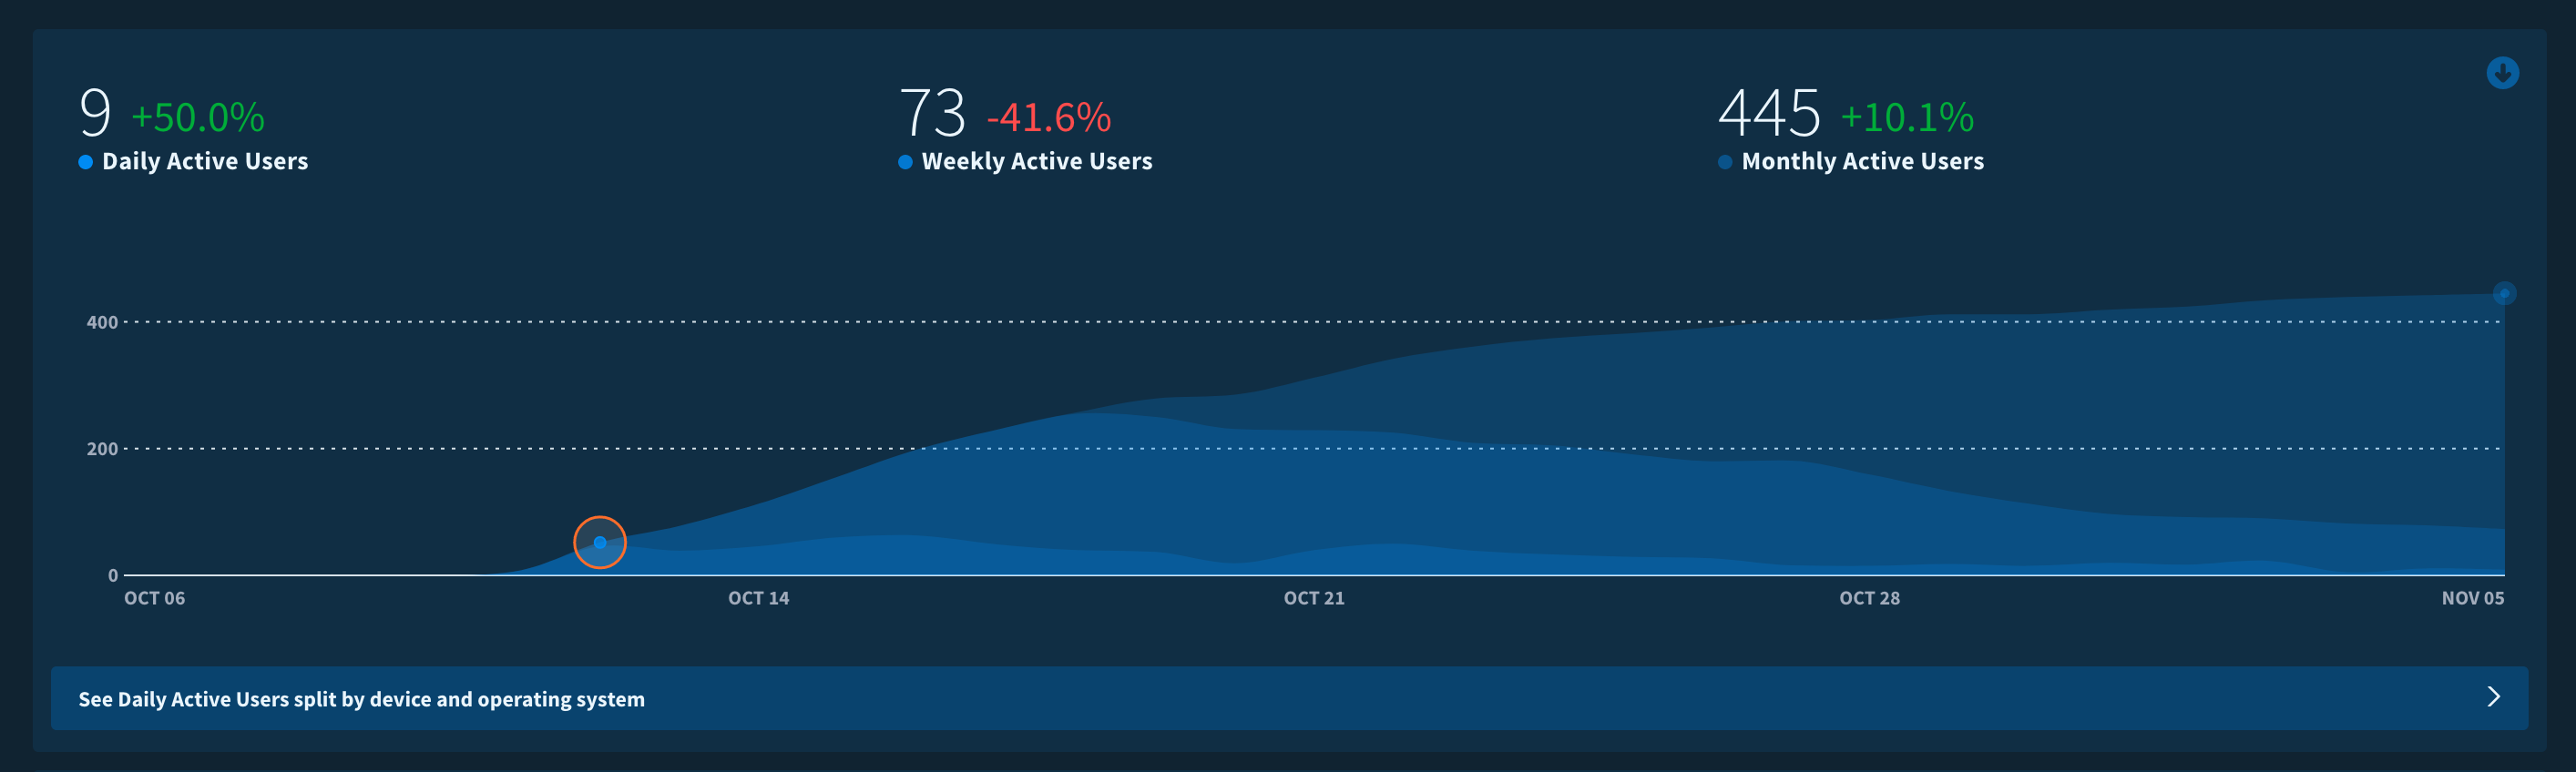 Monthly active users